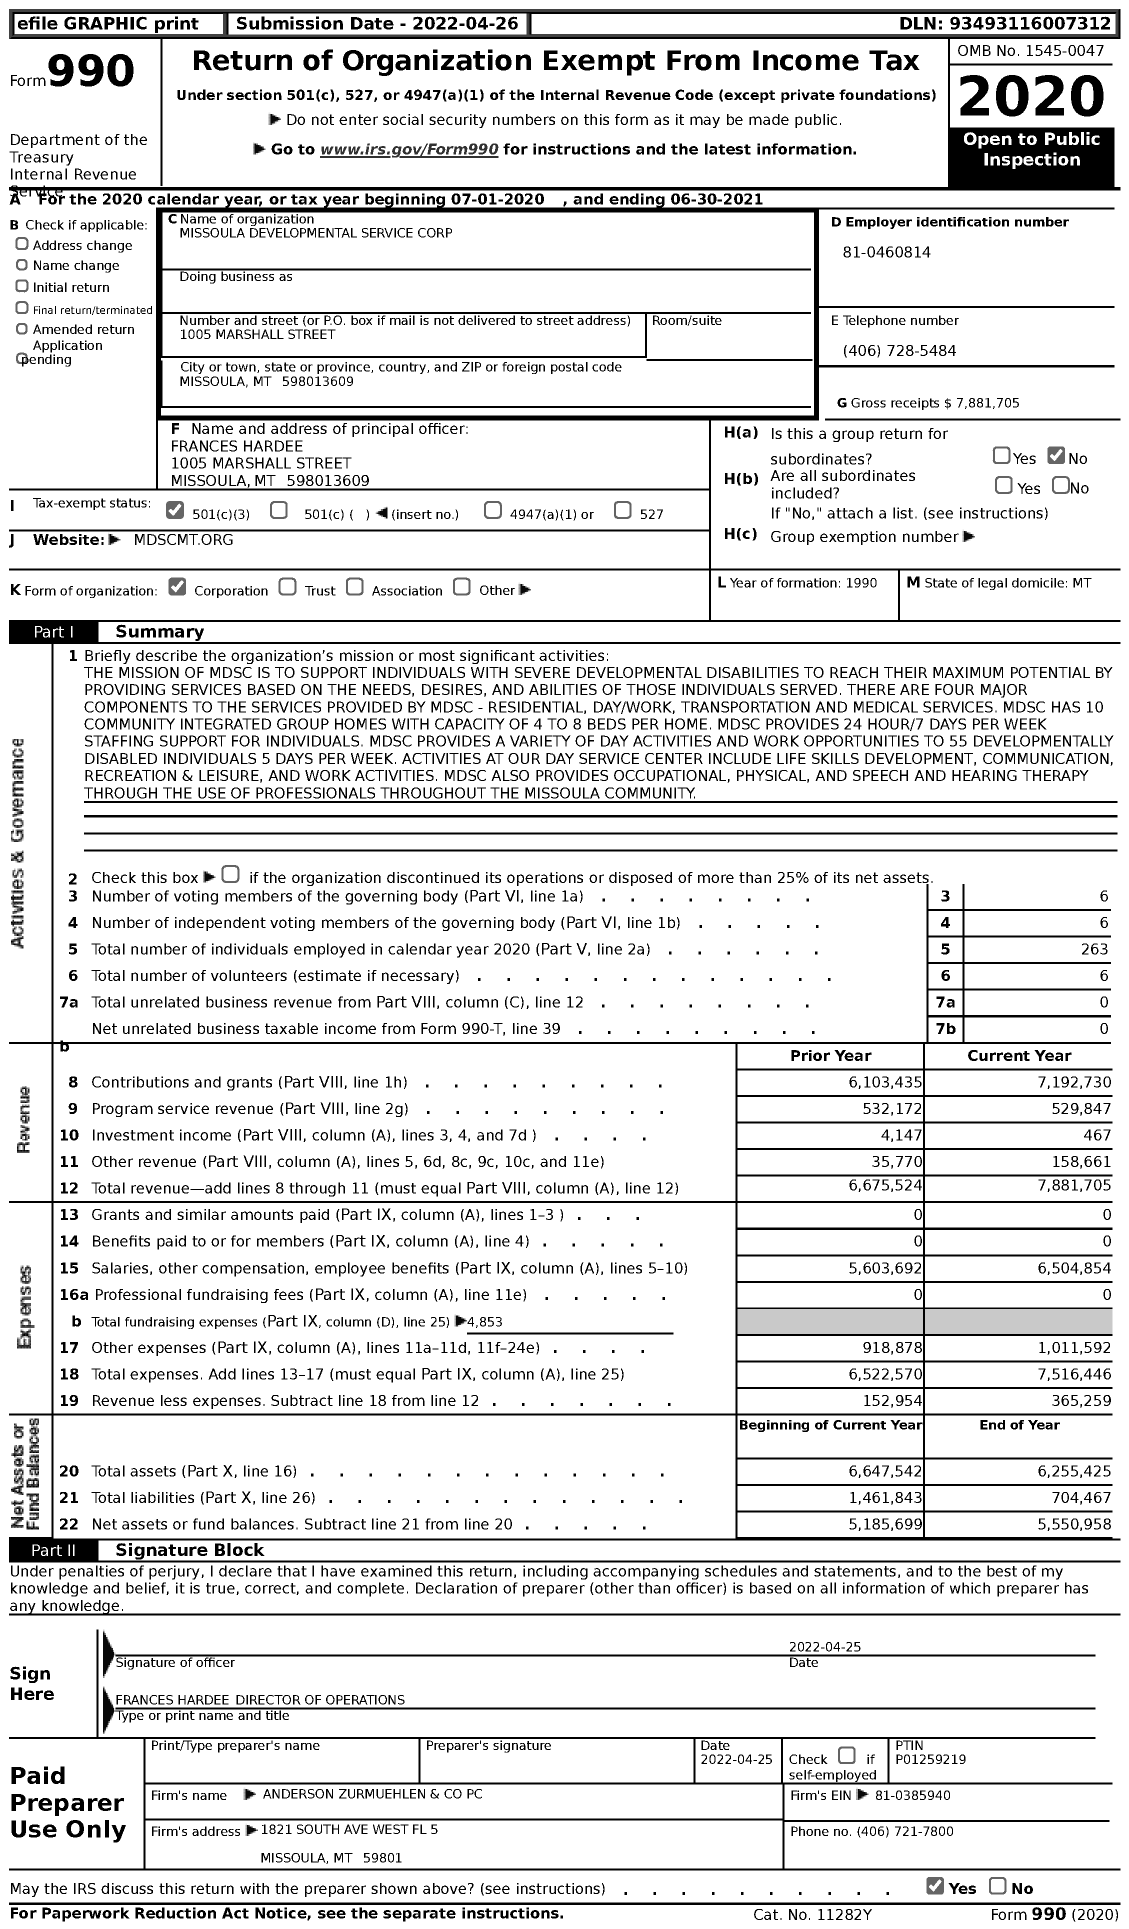 Image of first page of 2020 Form 990 for Missoula Developmental Service Corporation (MDSC)